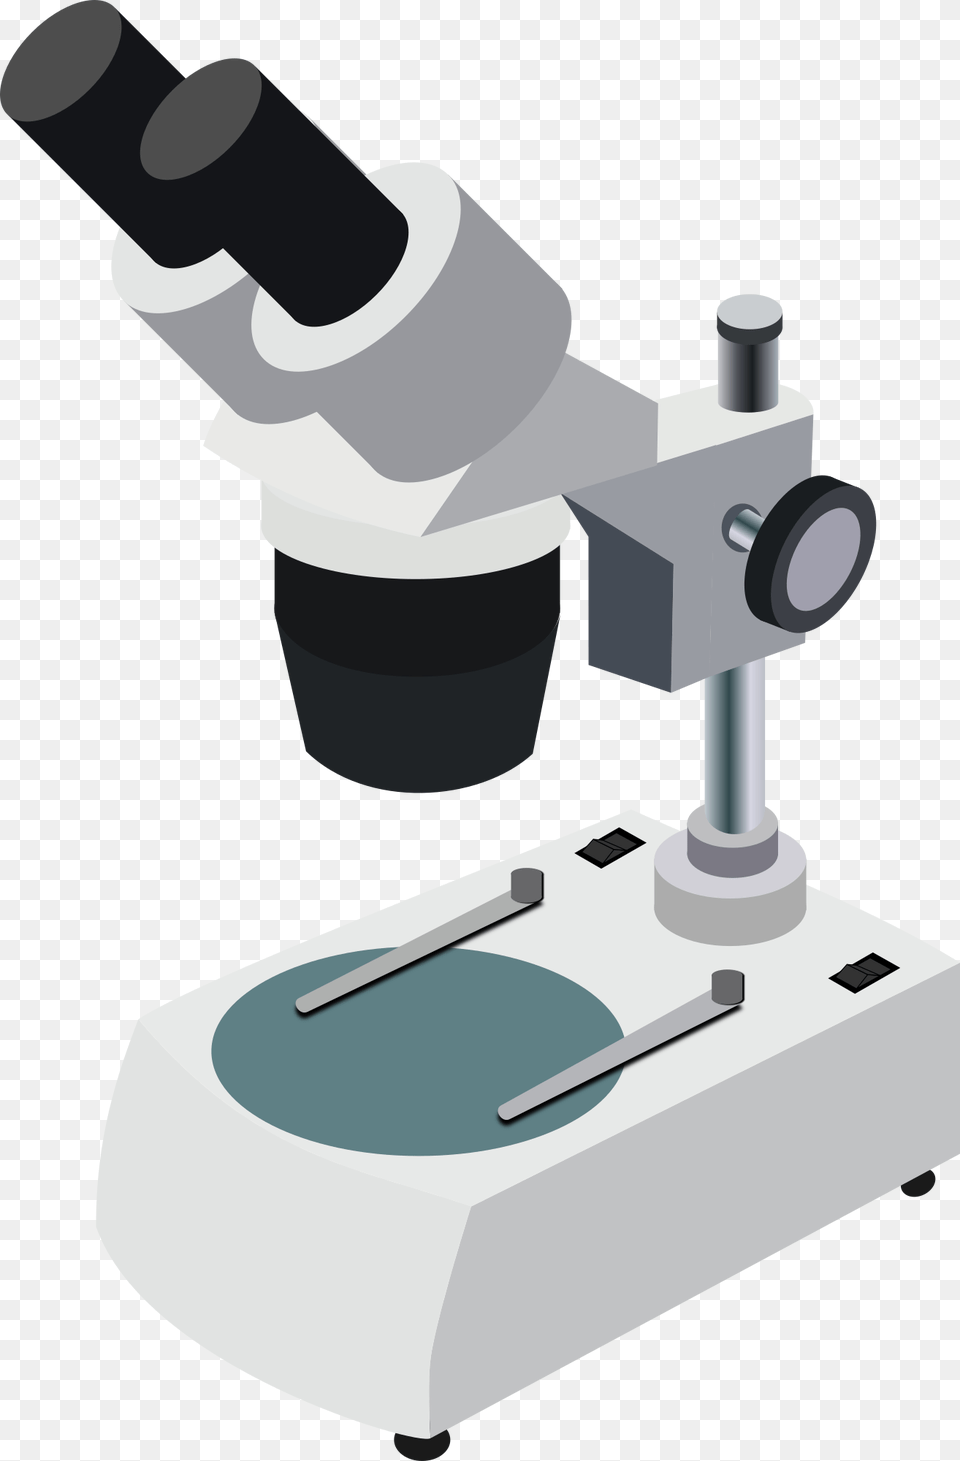 Library Microscope Files Microscope Cartoon, Bottle, Shaker Free Png Download